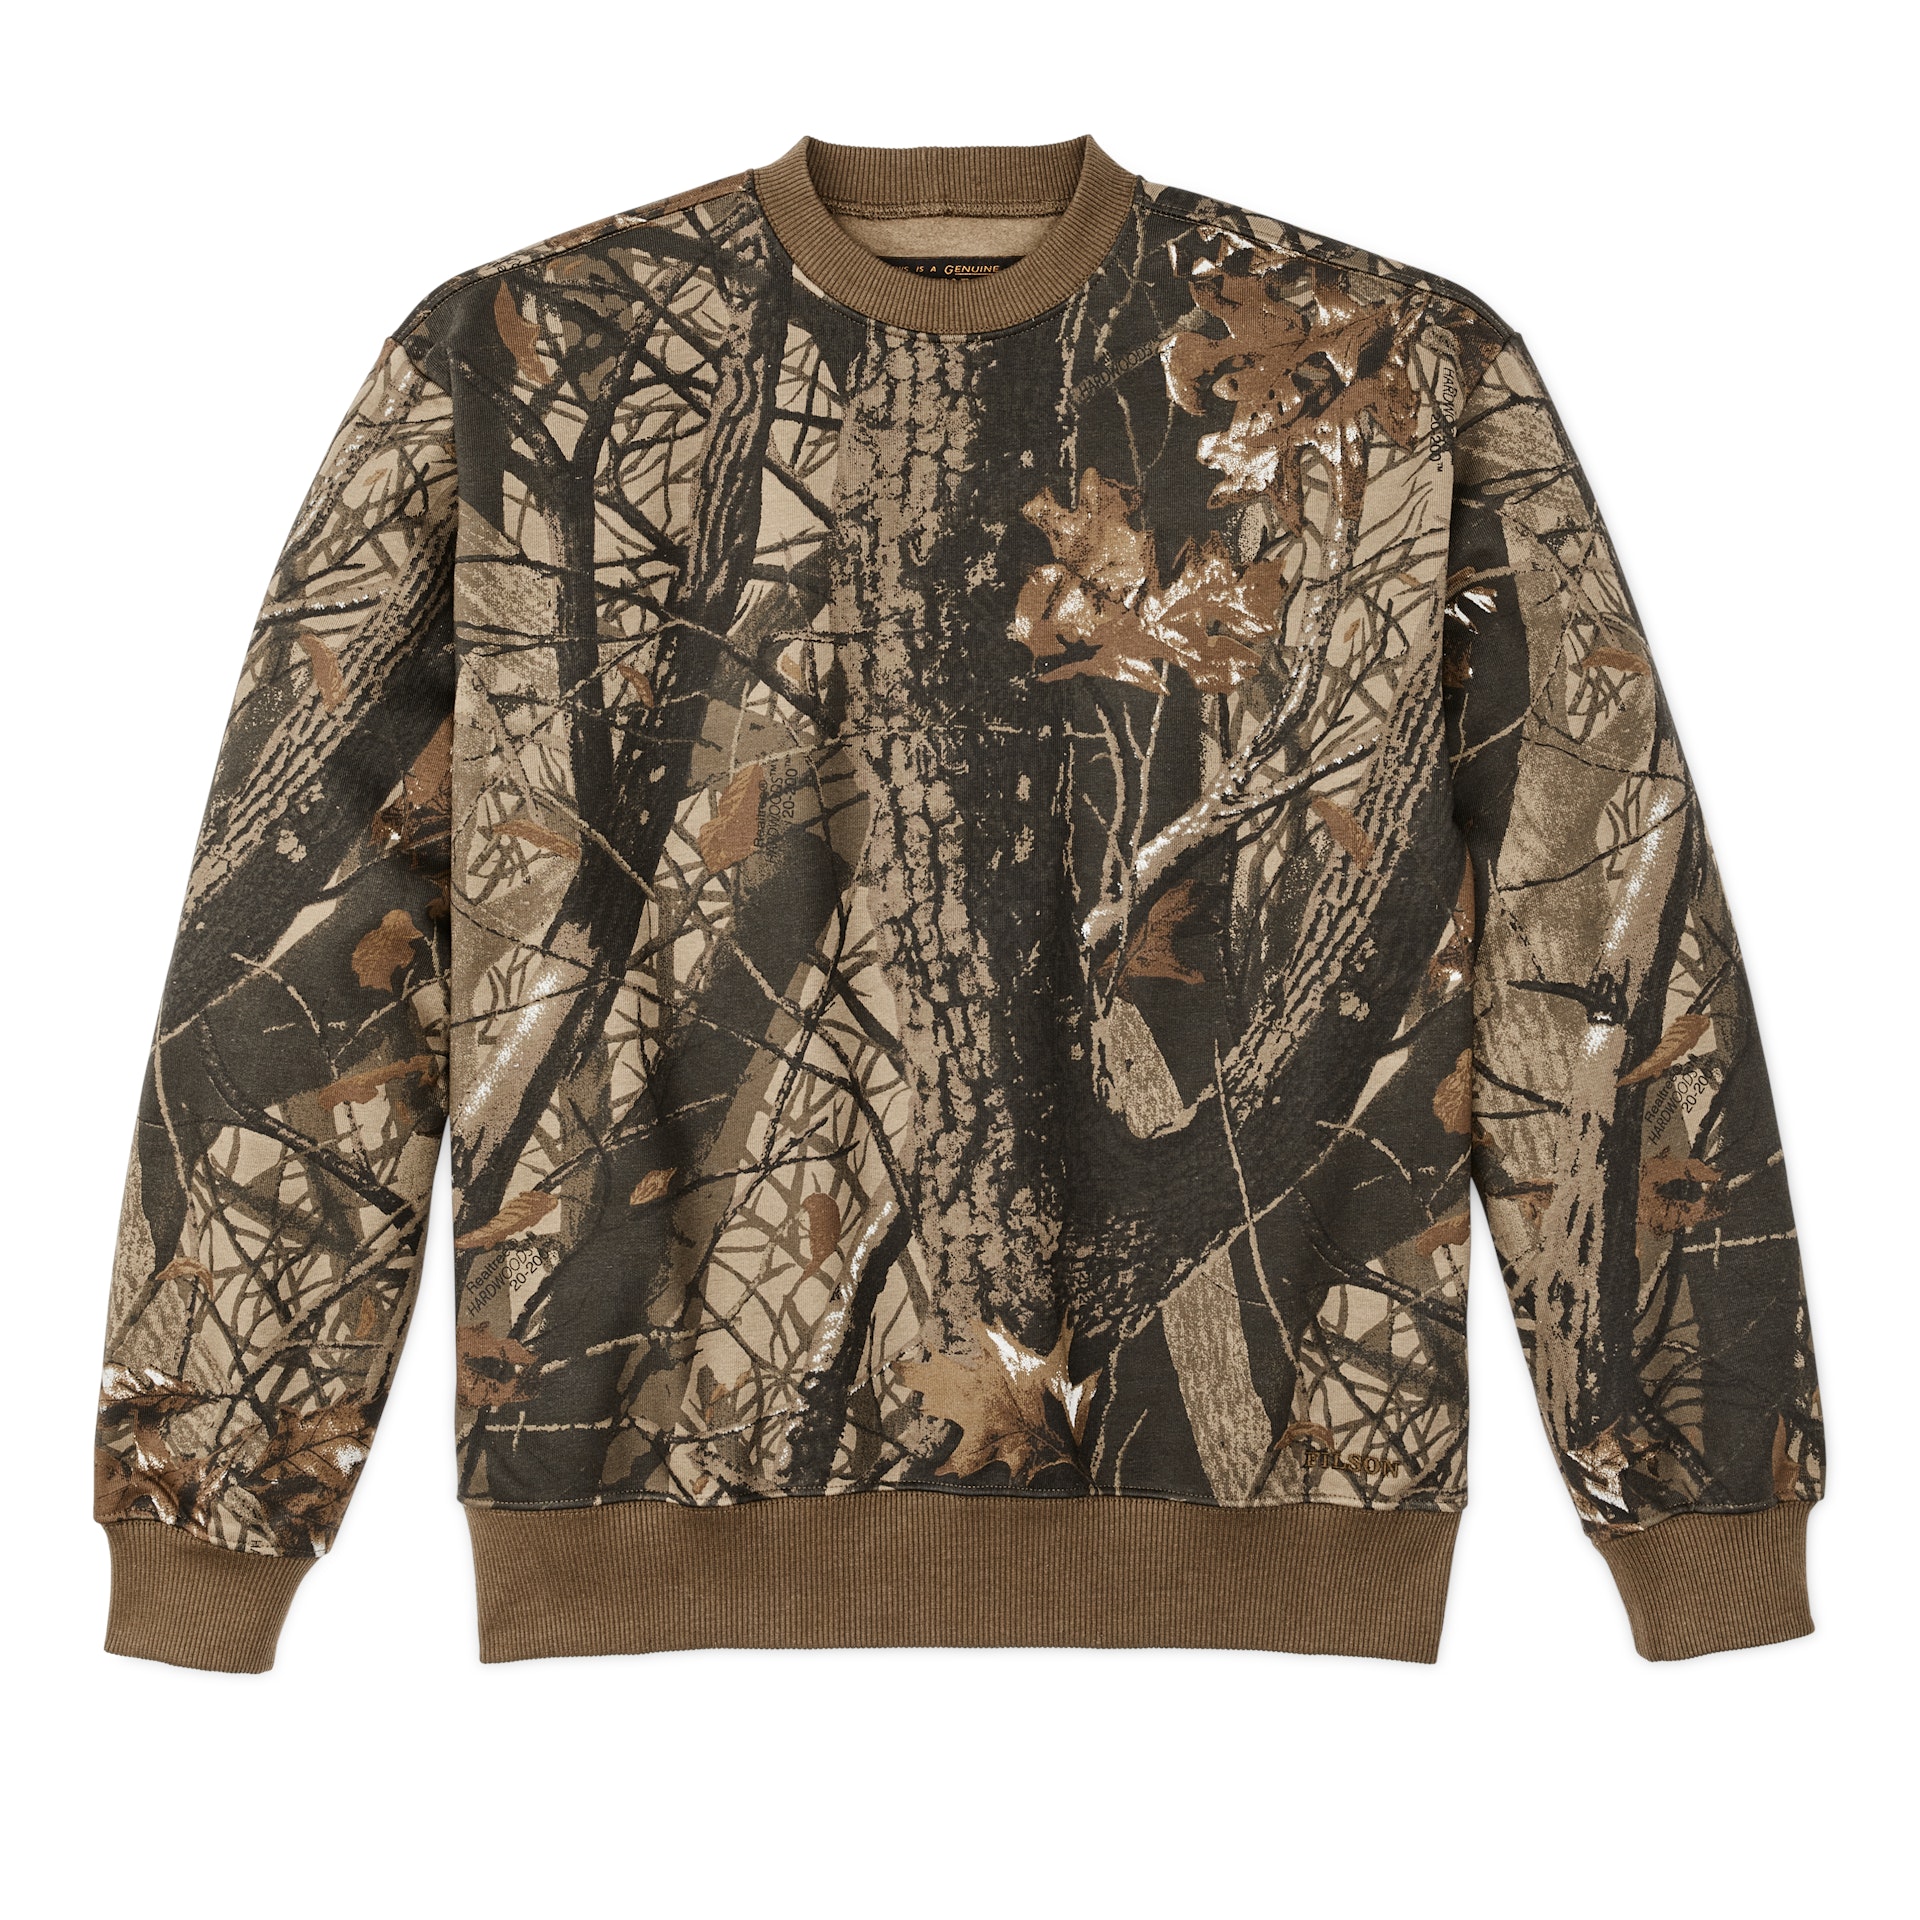 Realtree Camouflage Long Sleeve Hoodies & Sweatshirts for Women for sale